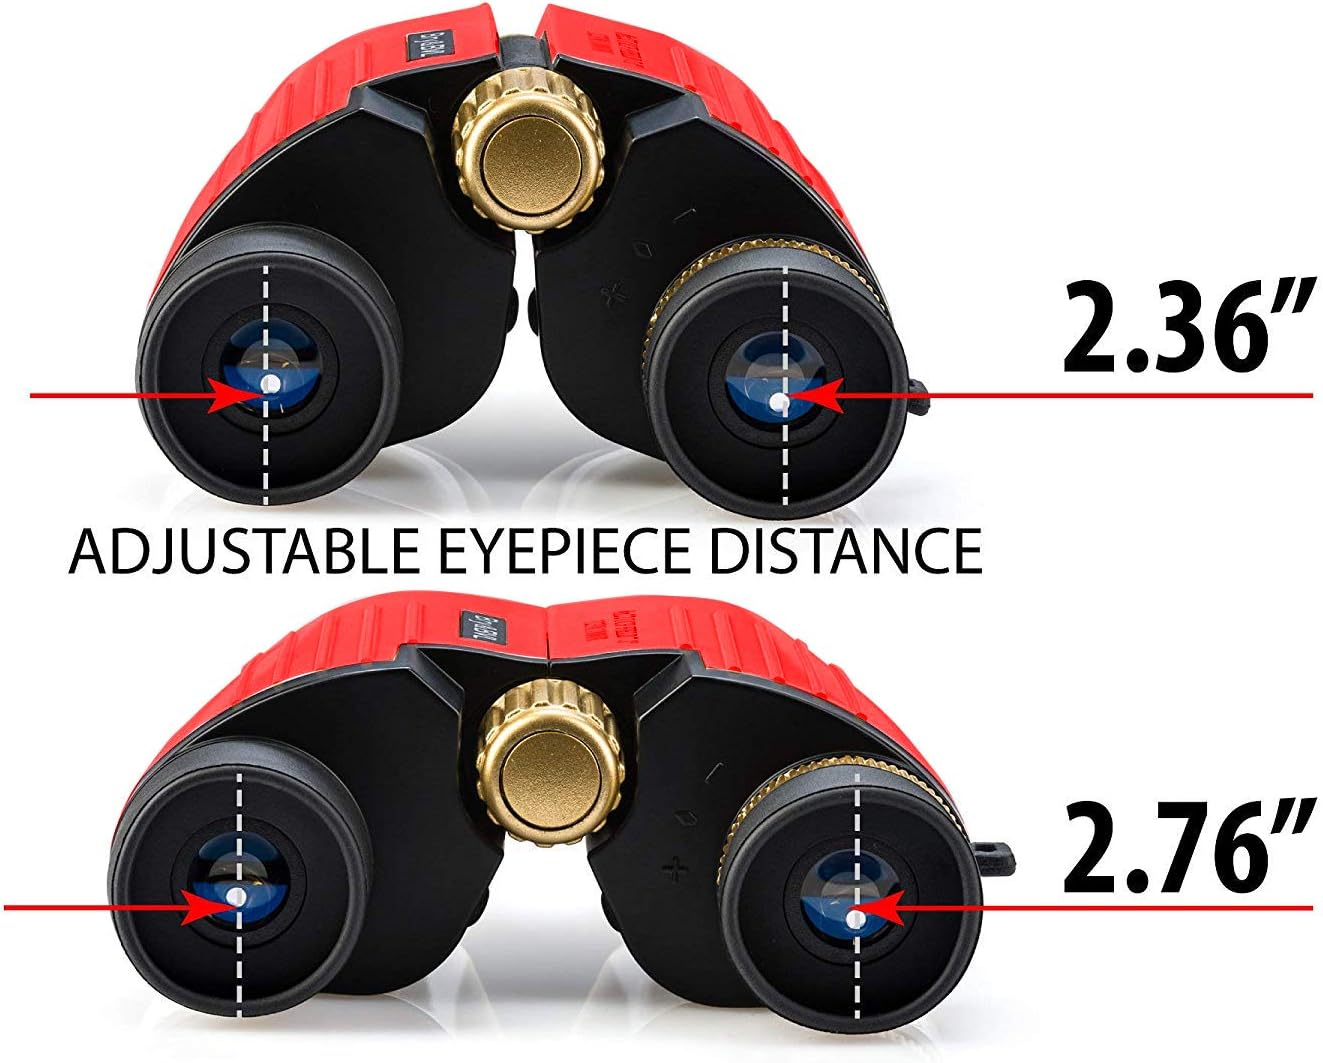 Binoculars for Kids - High Resolution, Shockproof – 8X22 Kids Binoculars for Bird Watching, Best Toys for Boys, Girls – Real Optics Set for Outdoor Toddler Games – Detective and Spy Kids Toys